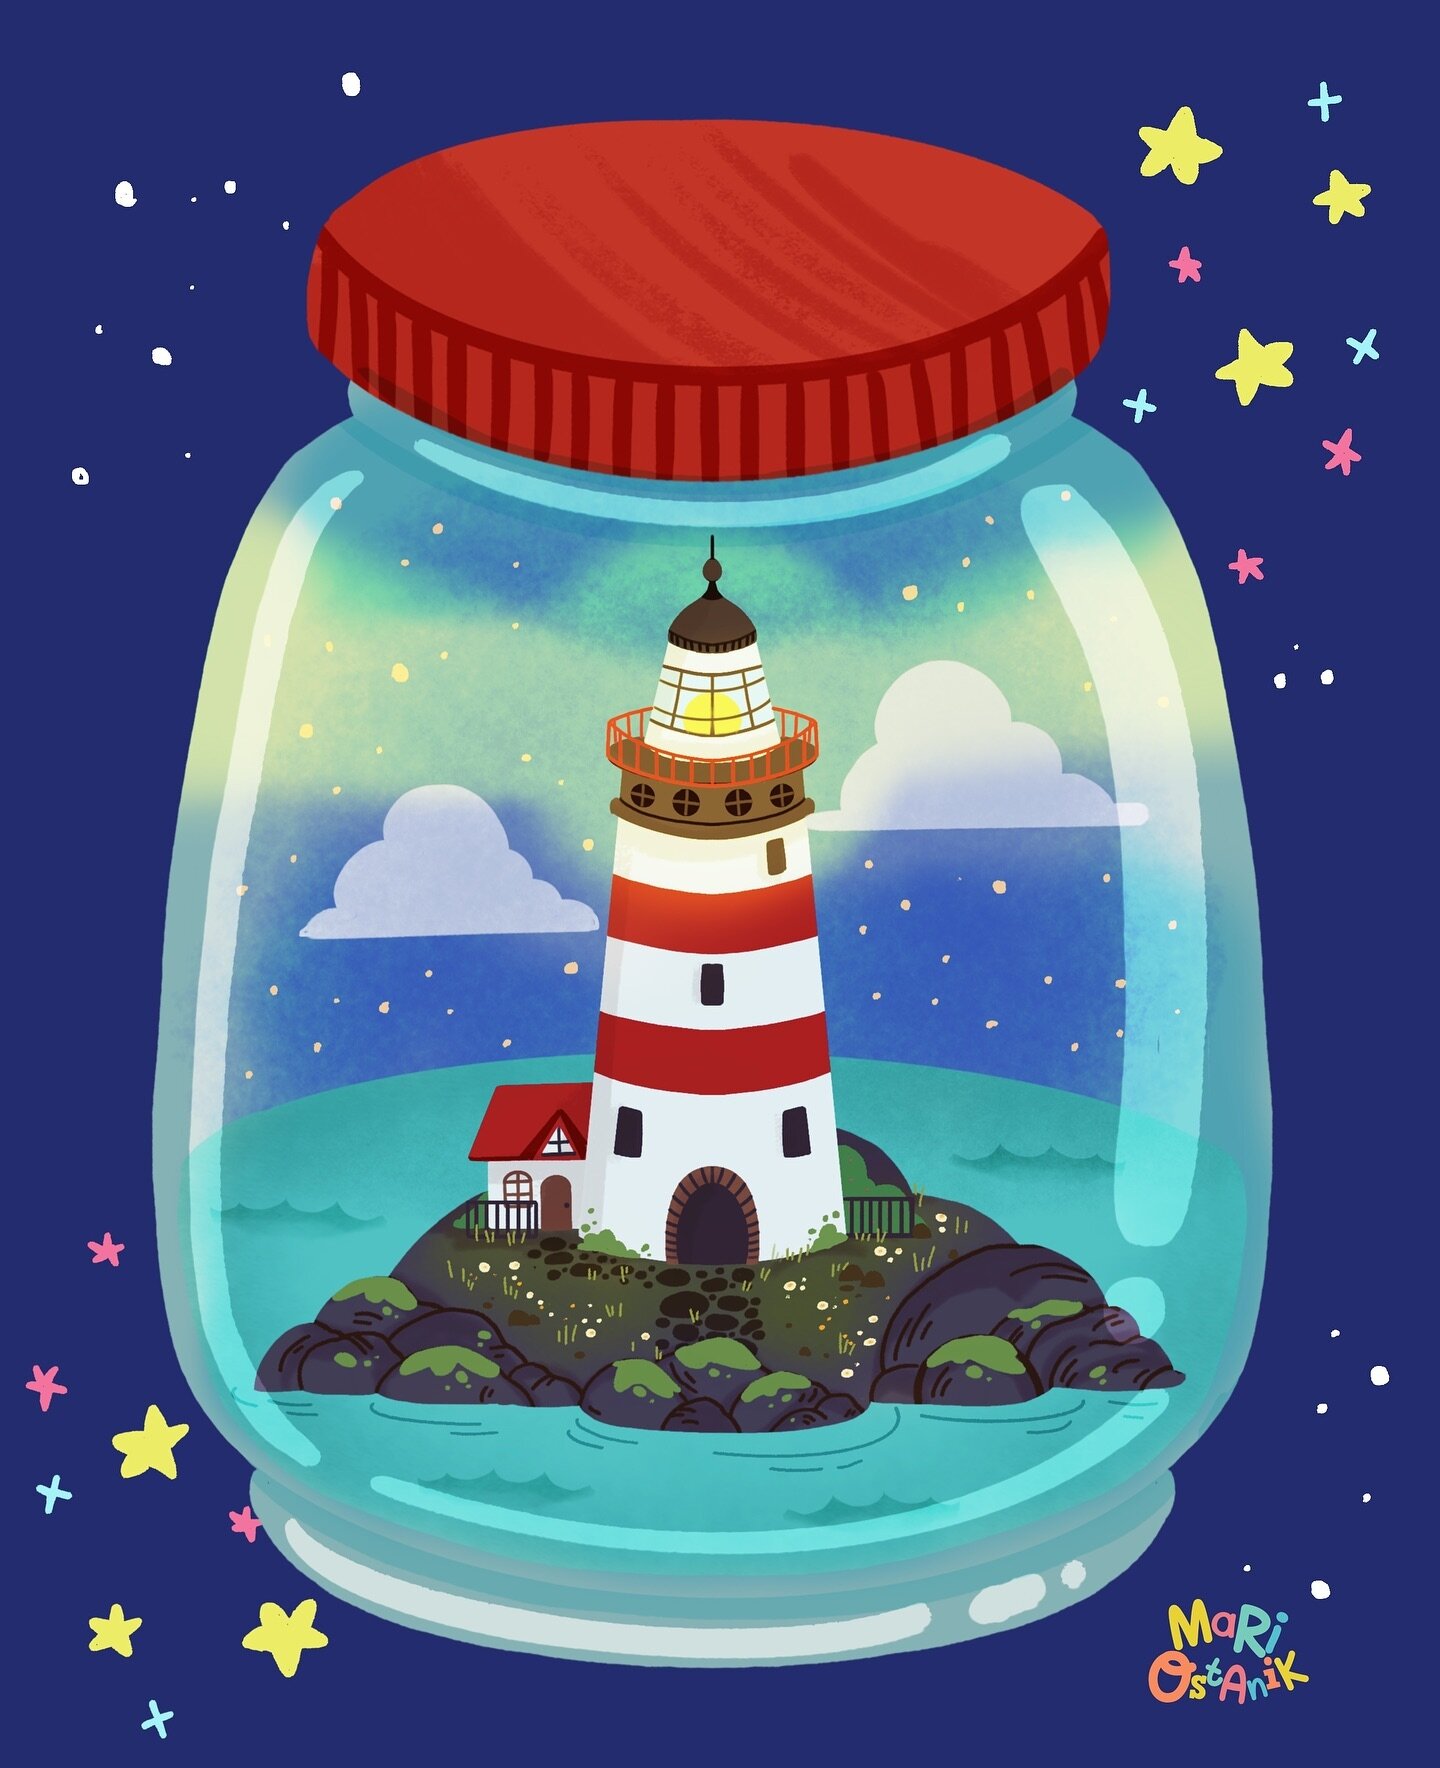 It&rsquo;s time to explore the magical world of imagination, where adorable creatures find their way around a charming terrarium adorned with a lighthouse. 🌿✨ #childrenillustration #illustrationmagic #kidlitart